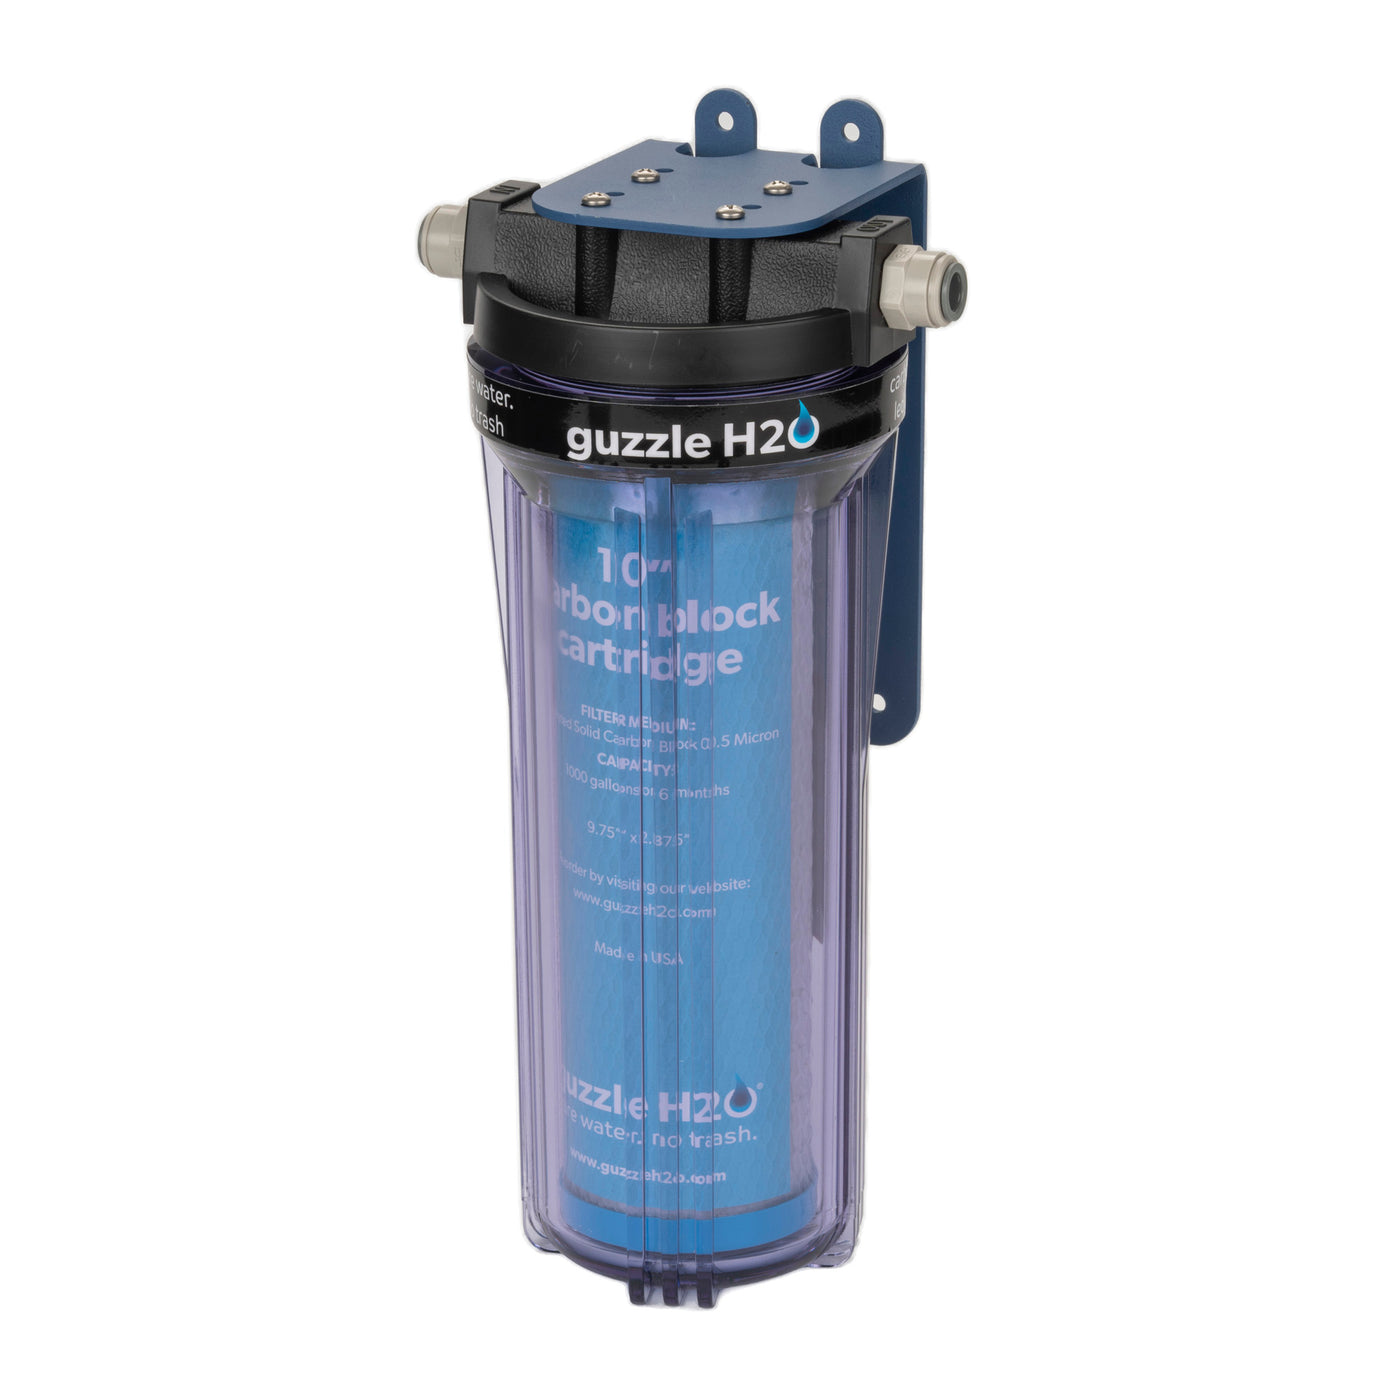 Guzzle H2O Stealth Carbon 10 Water Filtration System